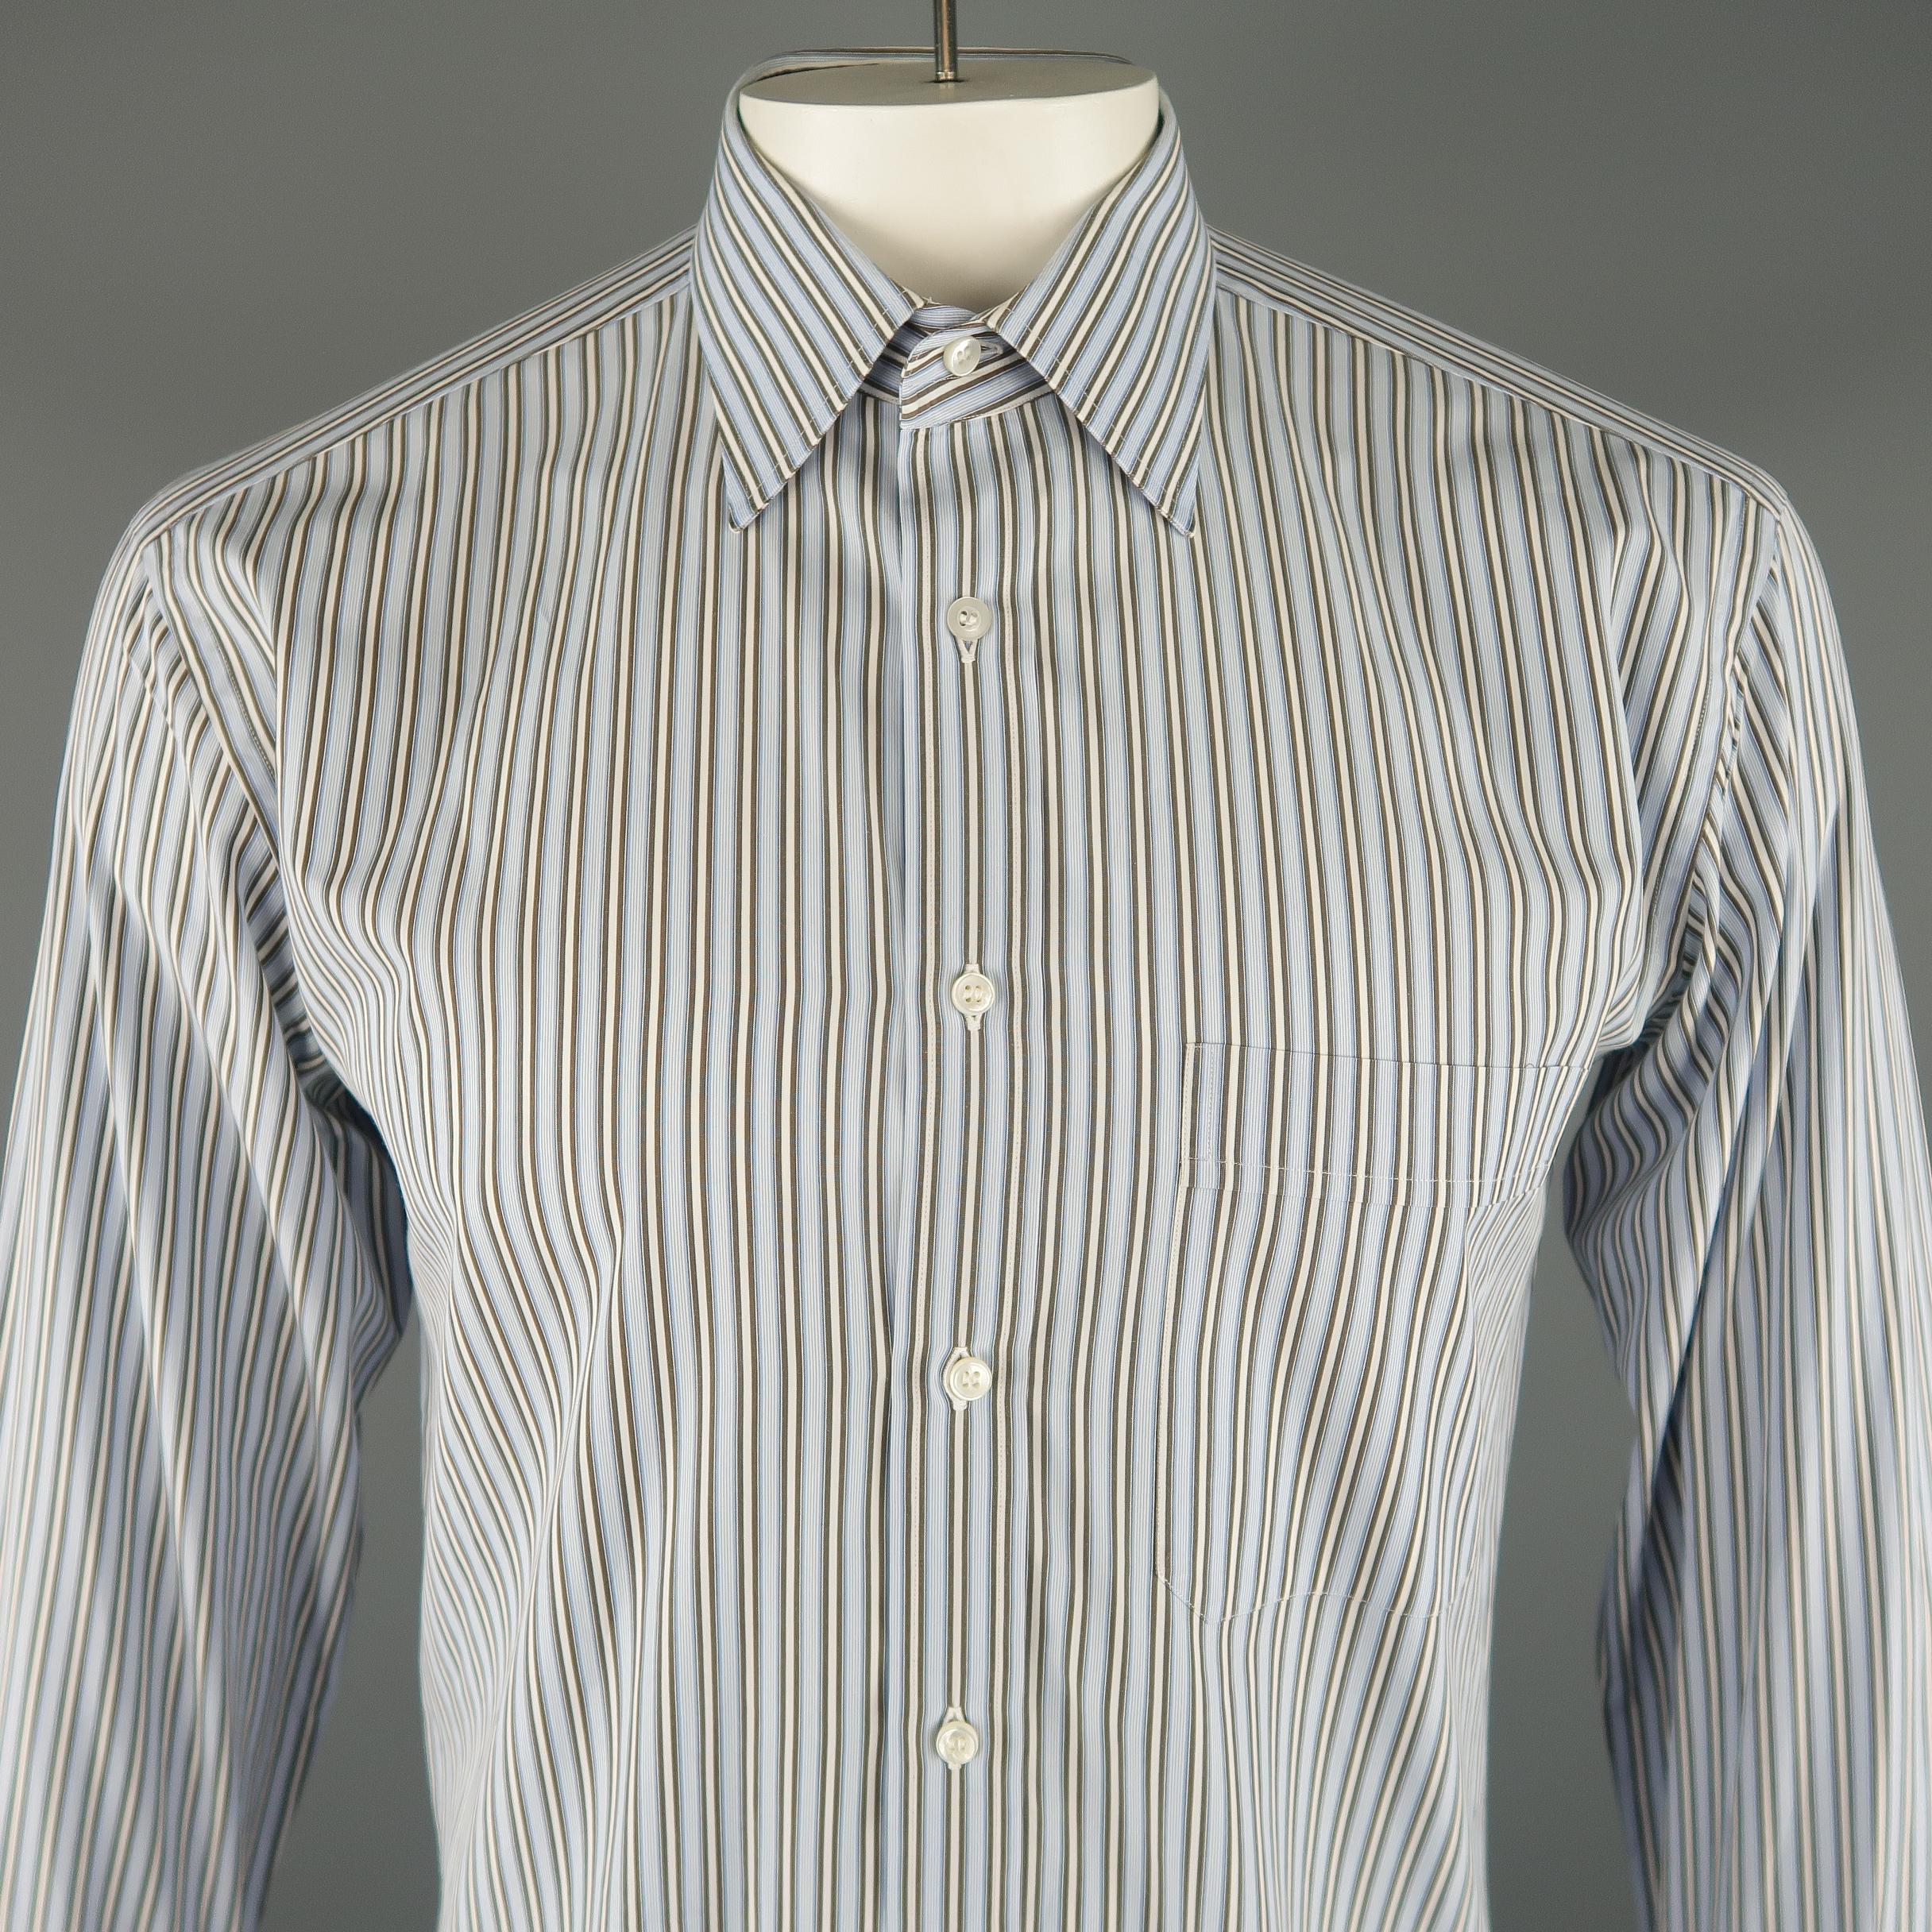 BRIONI classic long sleeve shirt comes in light blue, white and brown tones in striped cotton material, with a front pocket, button up. Made in Italy.
 
Excellent Pre-Owned Condition.
Marked: L  / 16 1/2
 
Measurements:
 
Shoulder: 18 in.
Chest: 45